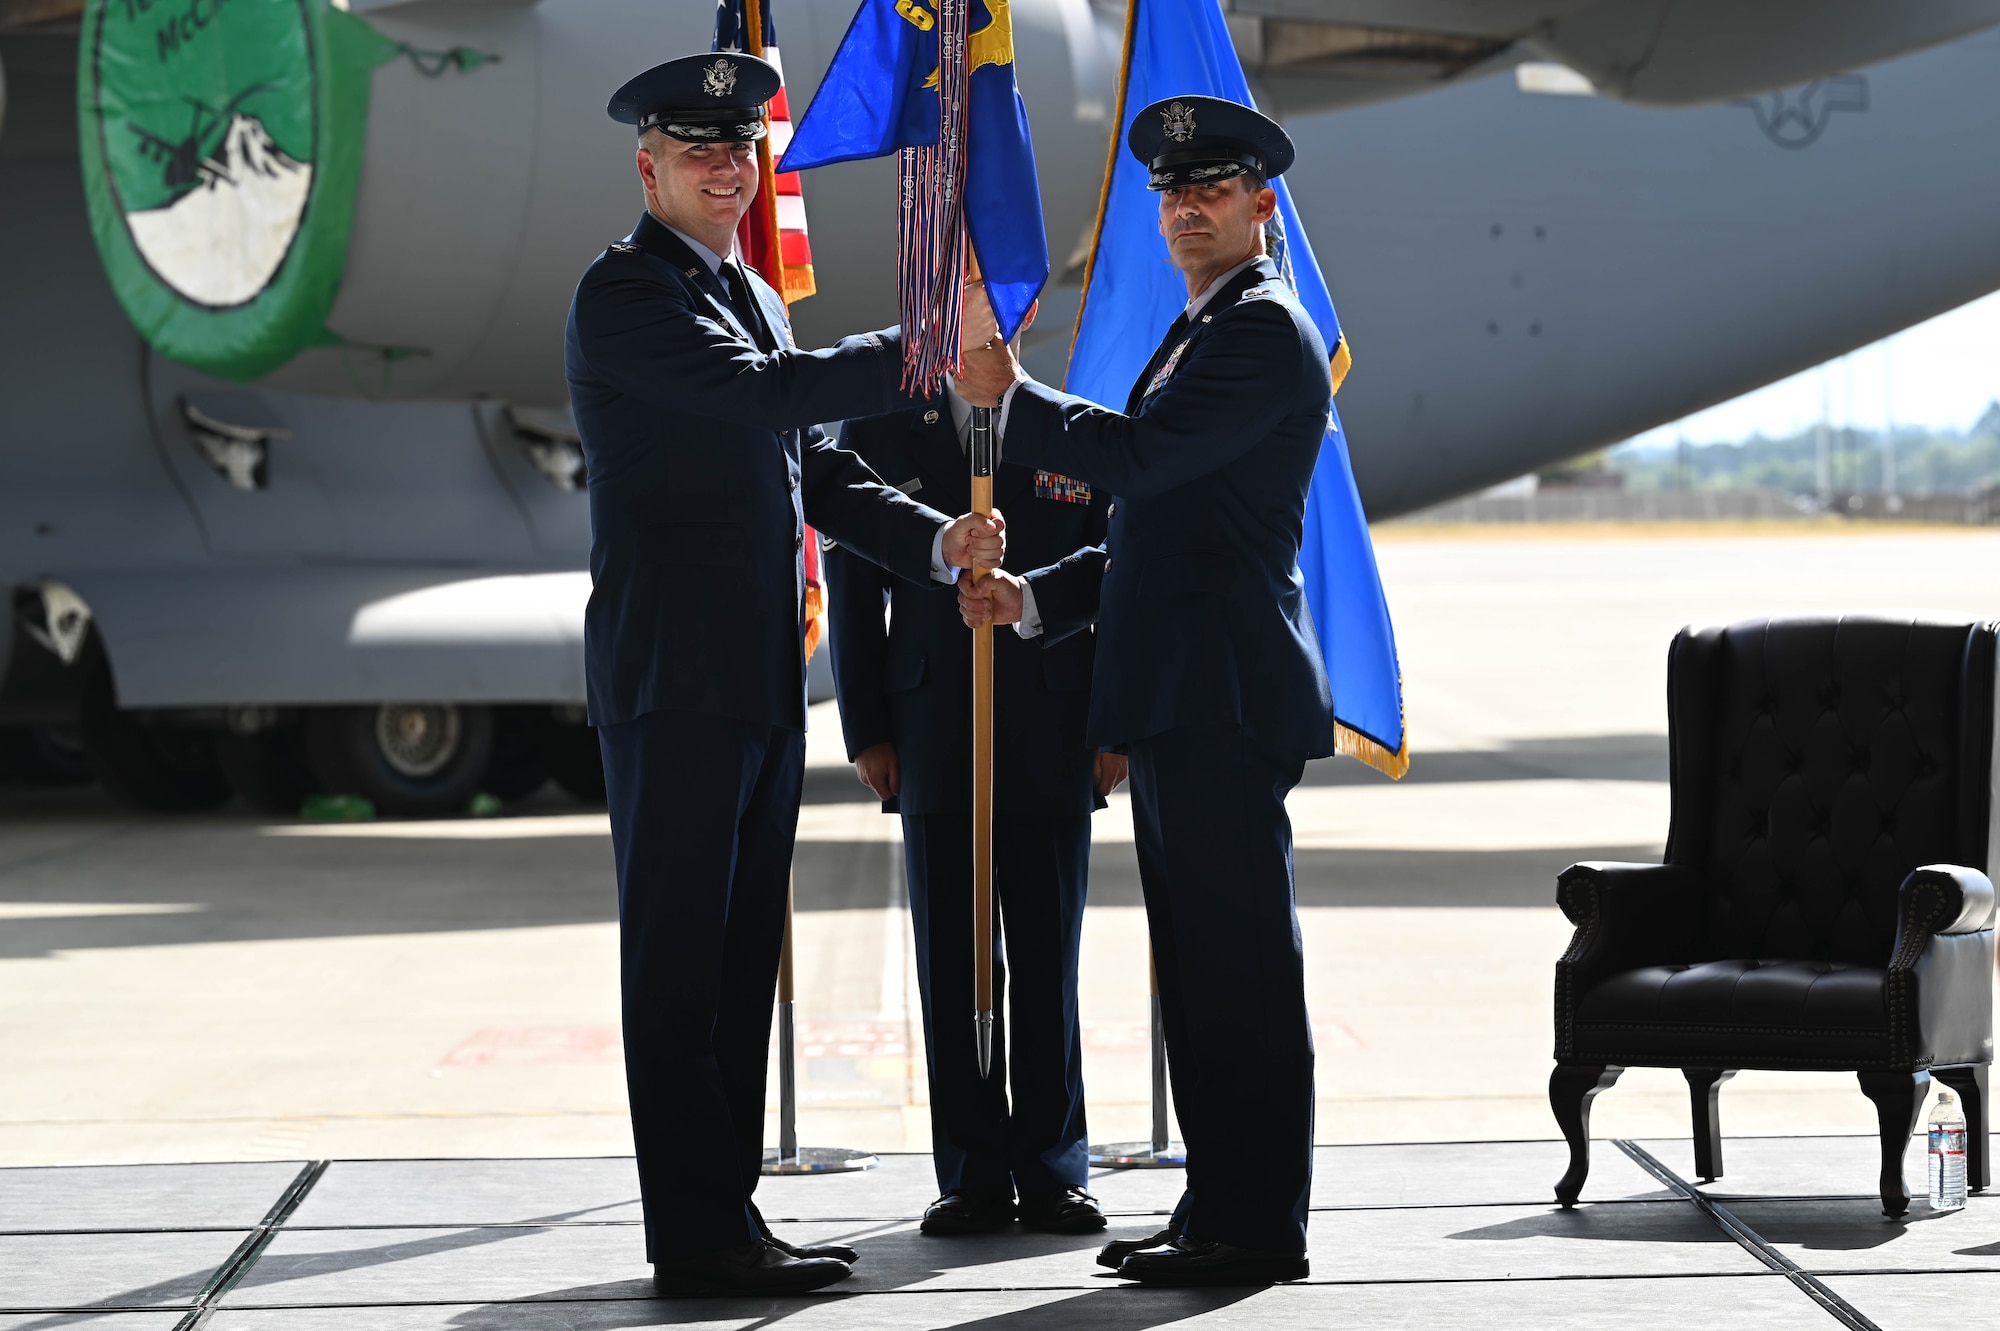 U.S. Air Force Col. Christopher Joyce, right, incoming commander of the 62d Maintenance Group receives guidon from U.S. Air Force Col. David Fazenbaker, commander of the 62d Airlift Wing during 62d MXG assumption of command ceremony at Joint Base Lewis-McChord, Washington, Aug. 5, 2022. Joyce formerly worked as the director of the Strategic Solutions Division at the Defense Logistics Agency Operations Directorate J3. (U.S. Air Force photo by Airman 1st Colleen Anthony)